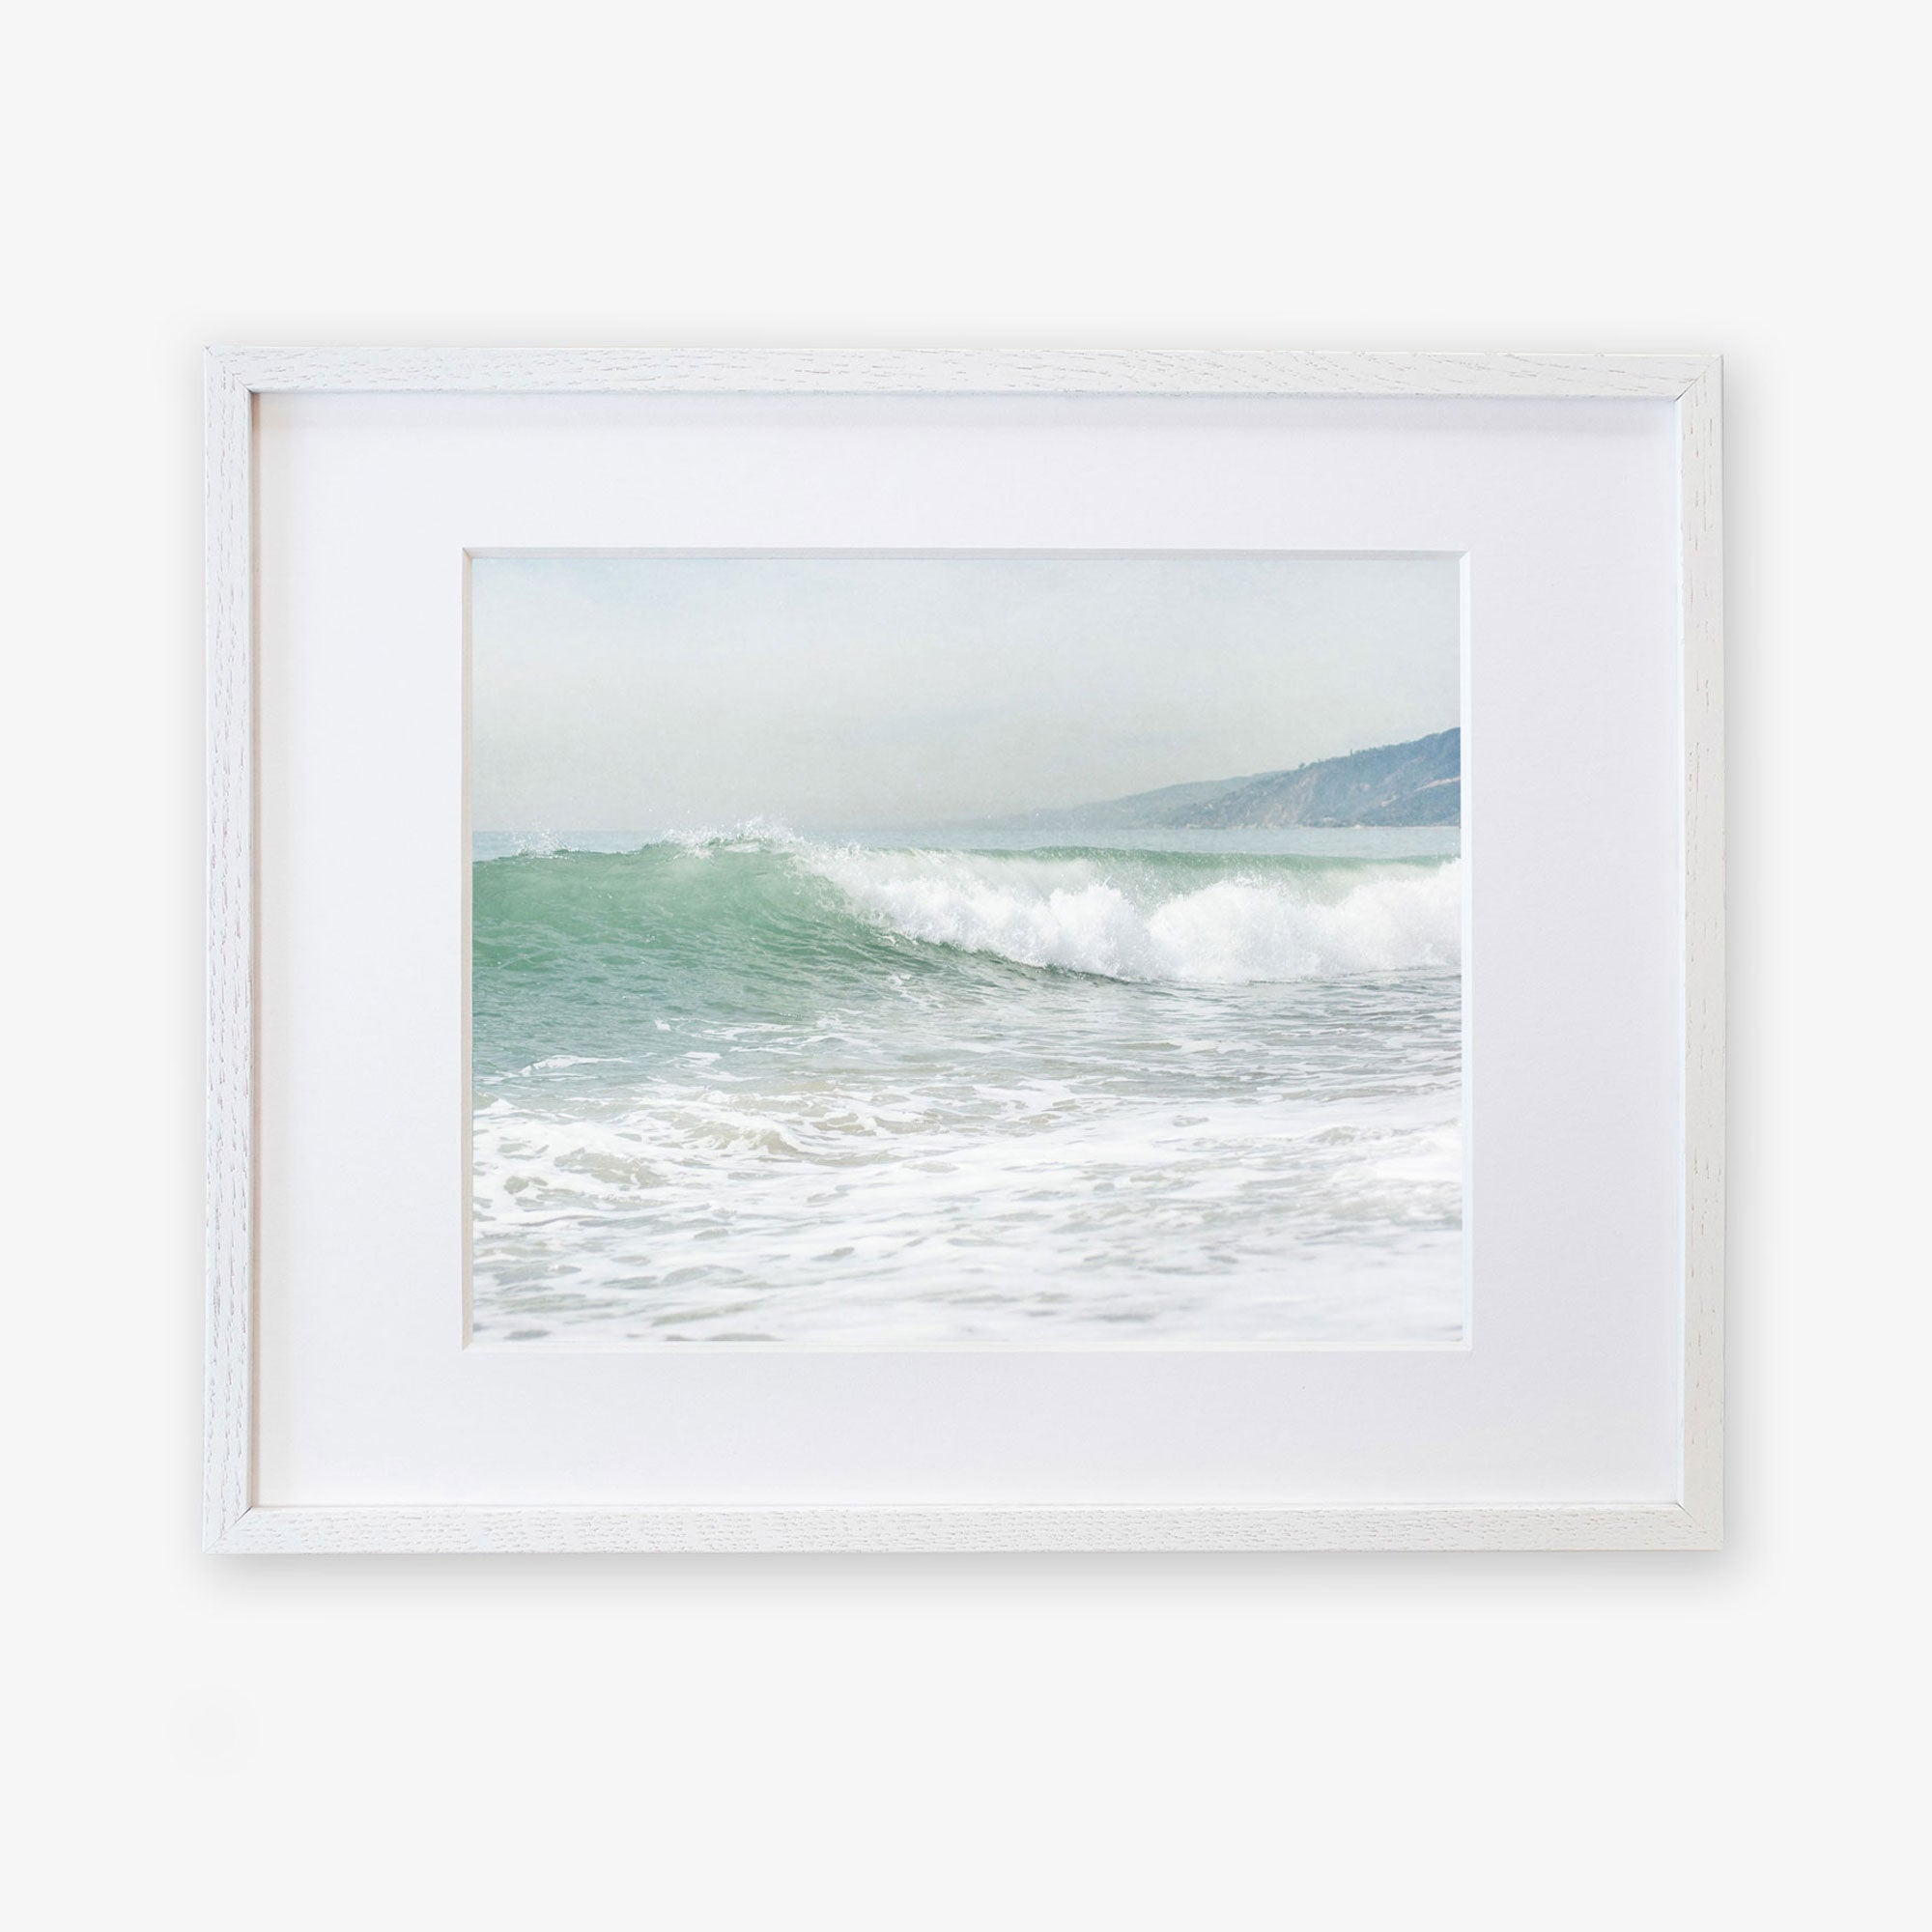 A framed Breaking Surf print of a vibrant ocean wave cresting at a Southern California beach, displayed in a simple white frame against a white background by Offley Green.